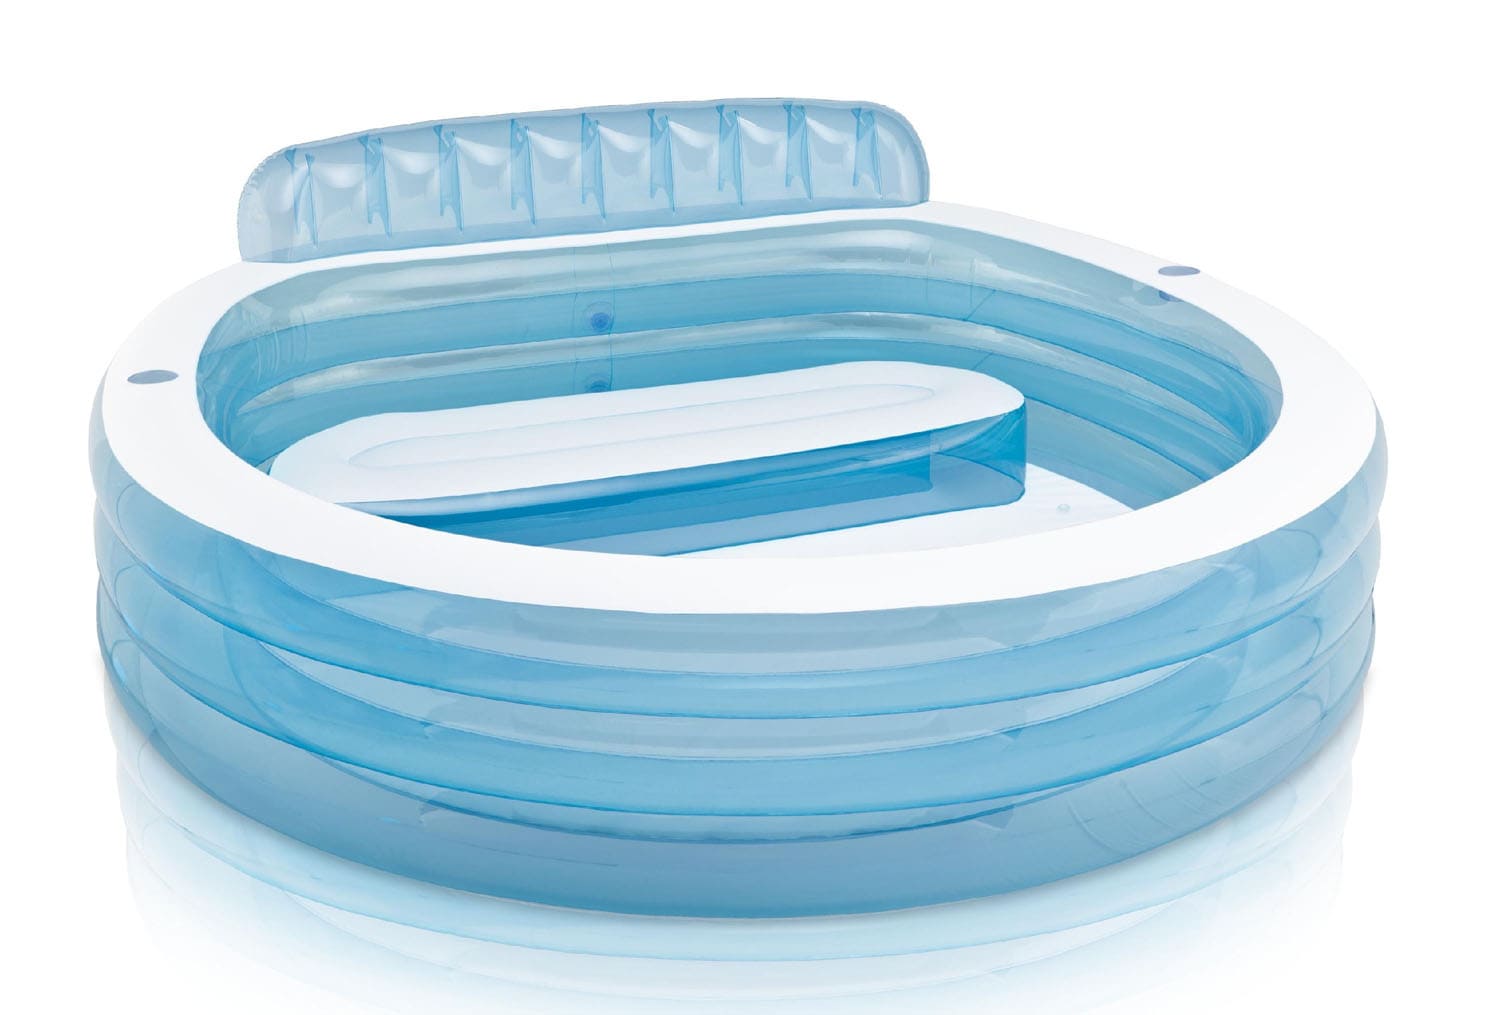 Intex 7.08-ft x 7.08-ft x 30-in Inflatable Top Ring Round Above-Ground Pool | 57592 -  57190EP